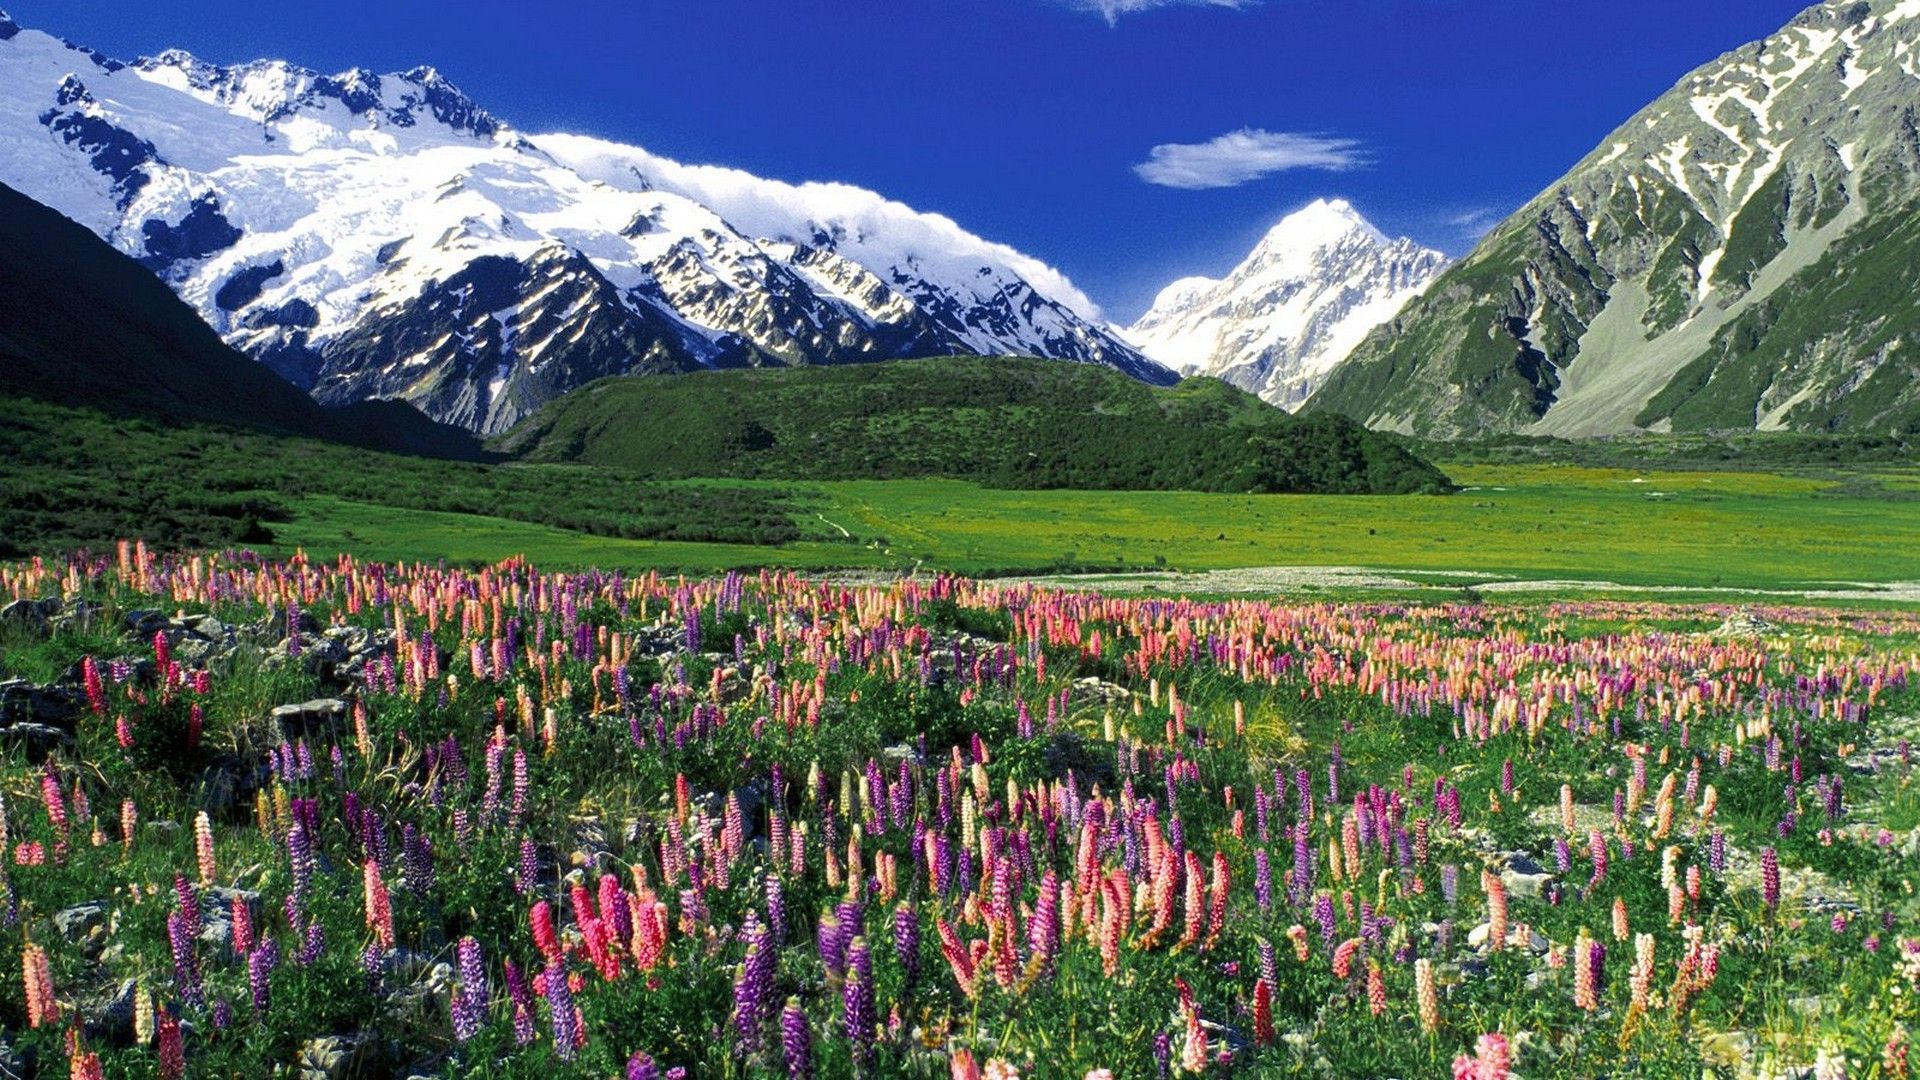 Free download Meadow Spring Wallpaper 1920x1080 Meadow Spring New Zealand Mount [1920x1080] for your Desktop, Mobile & Tablet. Explore Spring Meadow Wallpaper. Mountain Meadow Wallpaper, Green Green Meadow Wallpaper